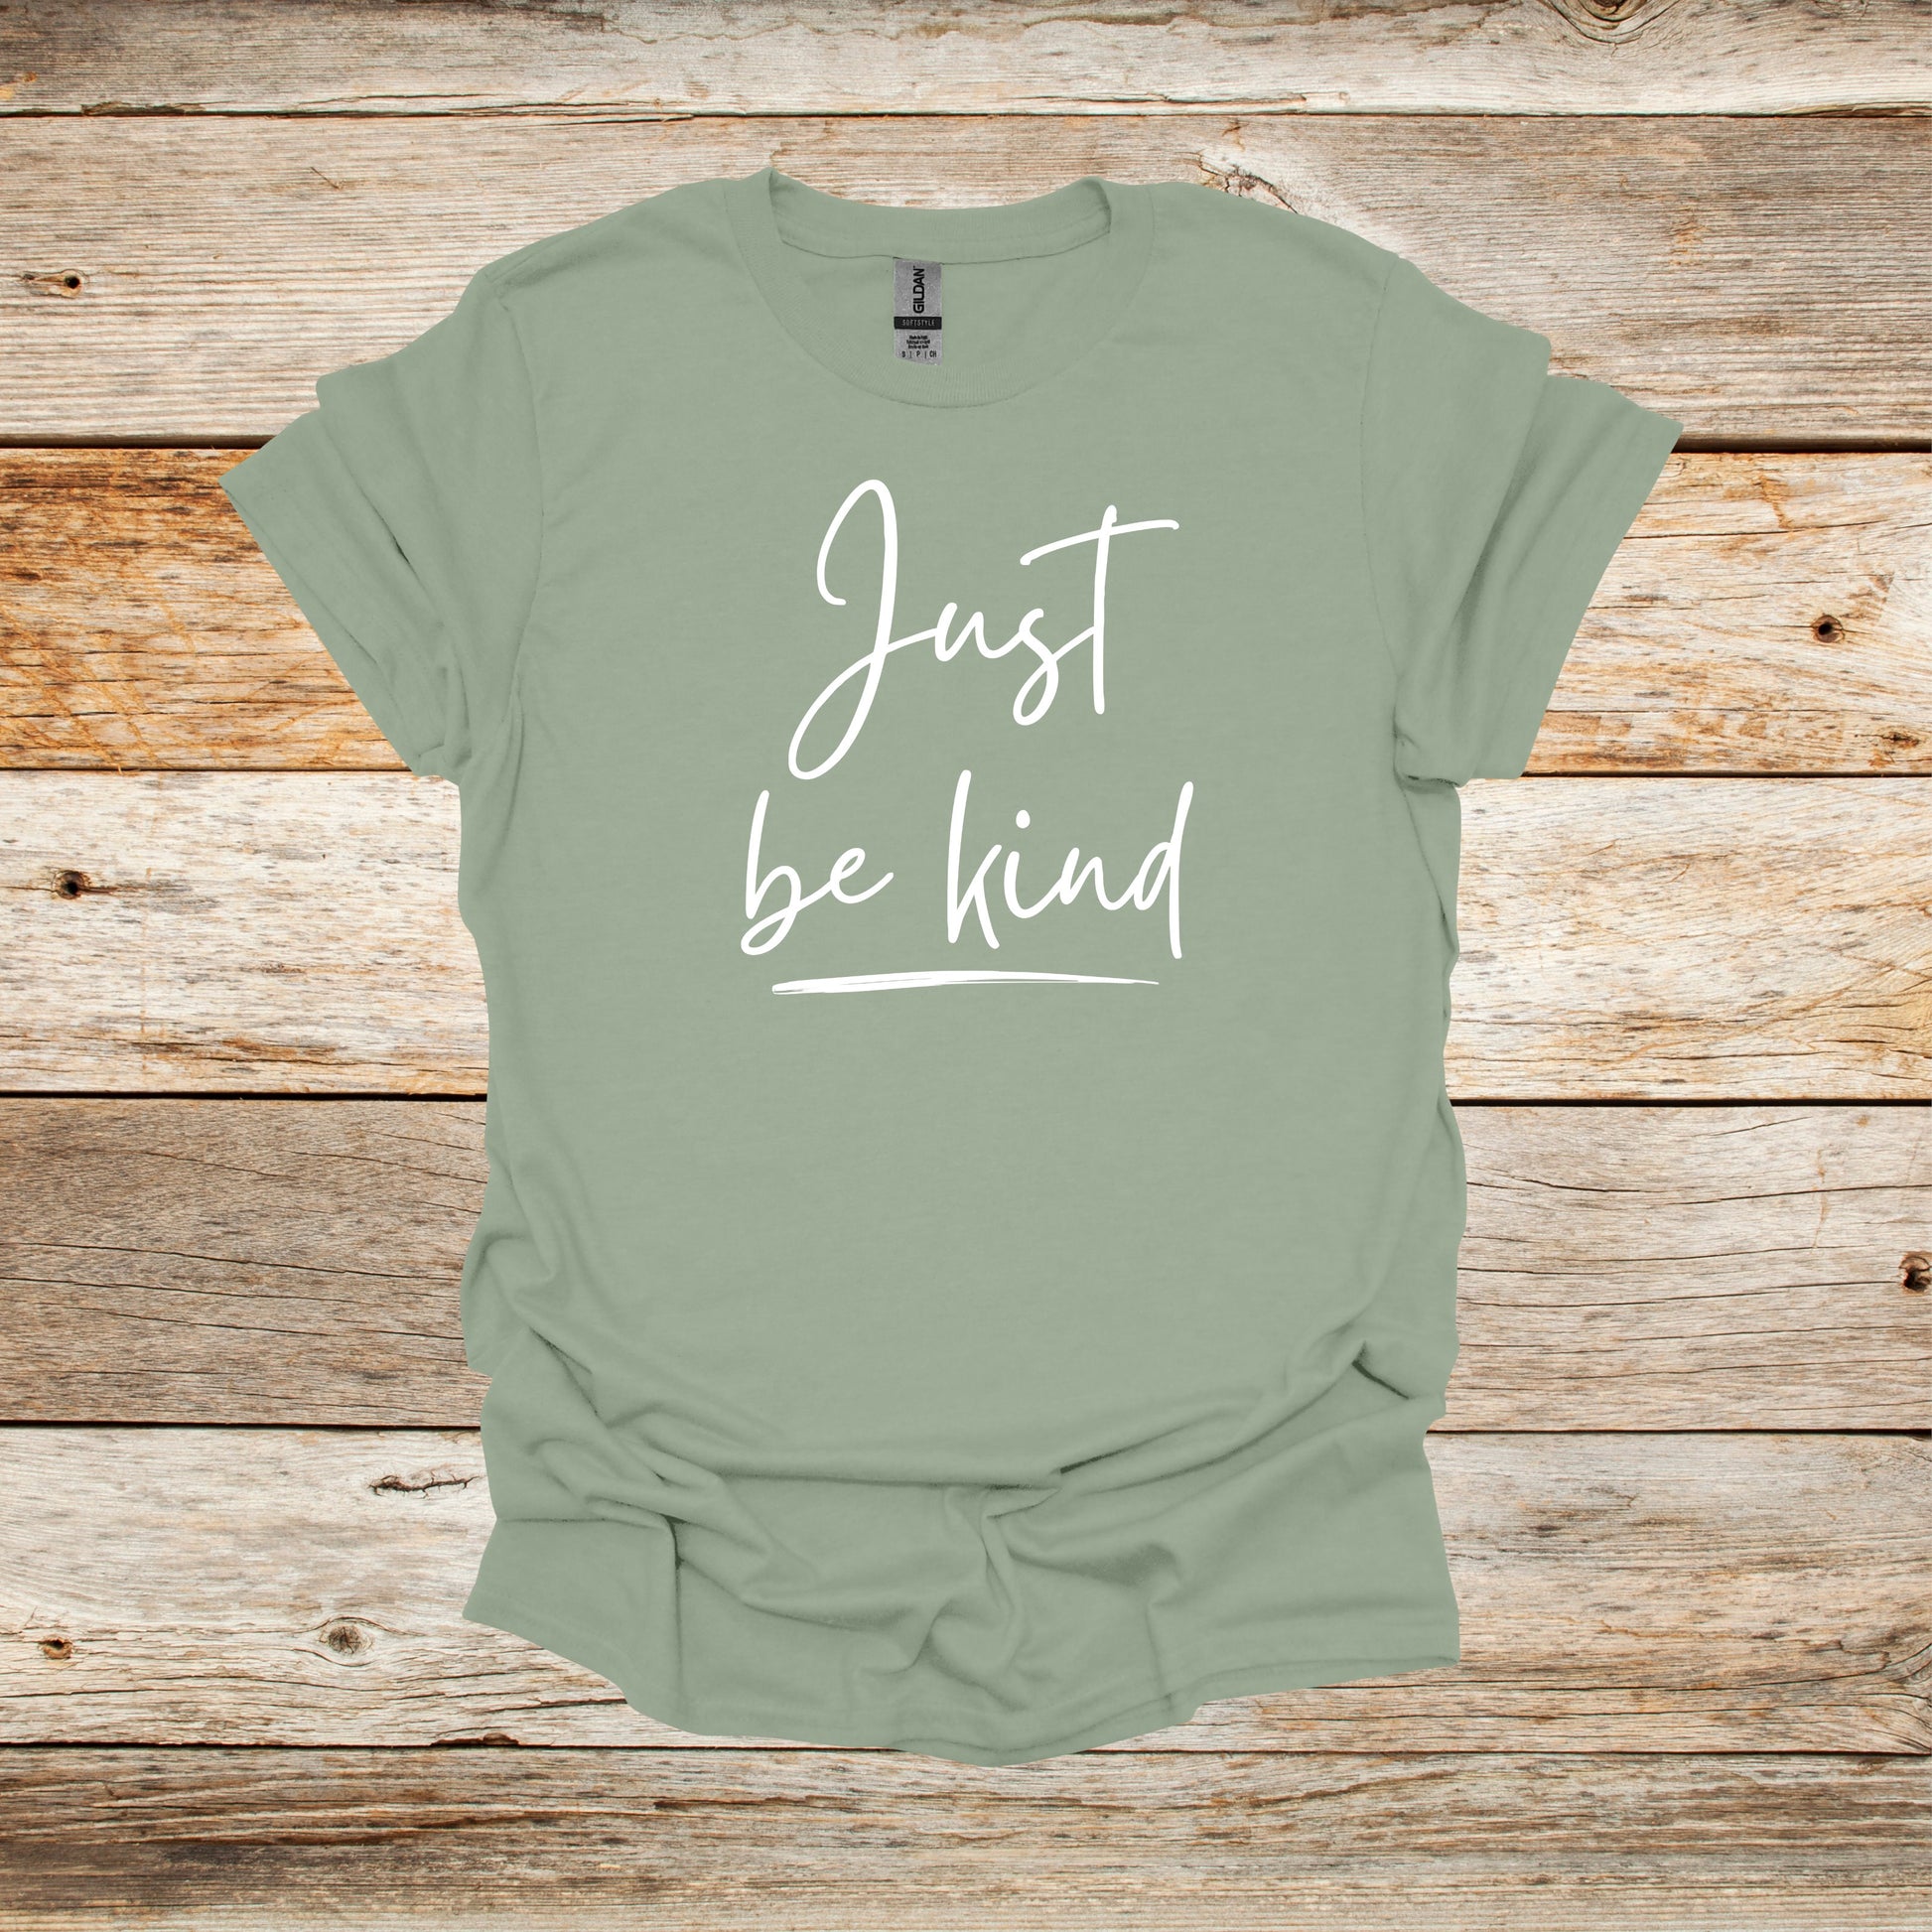 Sayings T-Shirt - Just Be Kind - Men's and Women's Tee Shirts - Sayings T-Shirts Graphic Avenue Sage Adult Small 